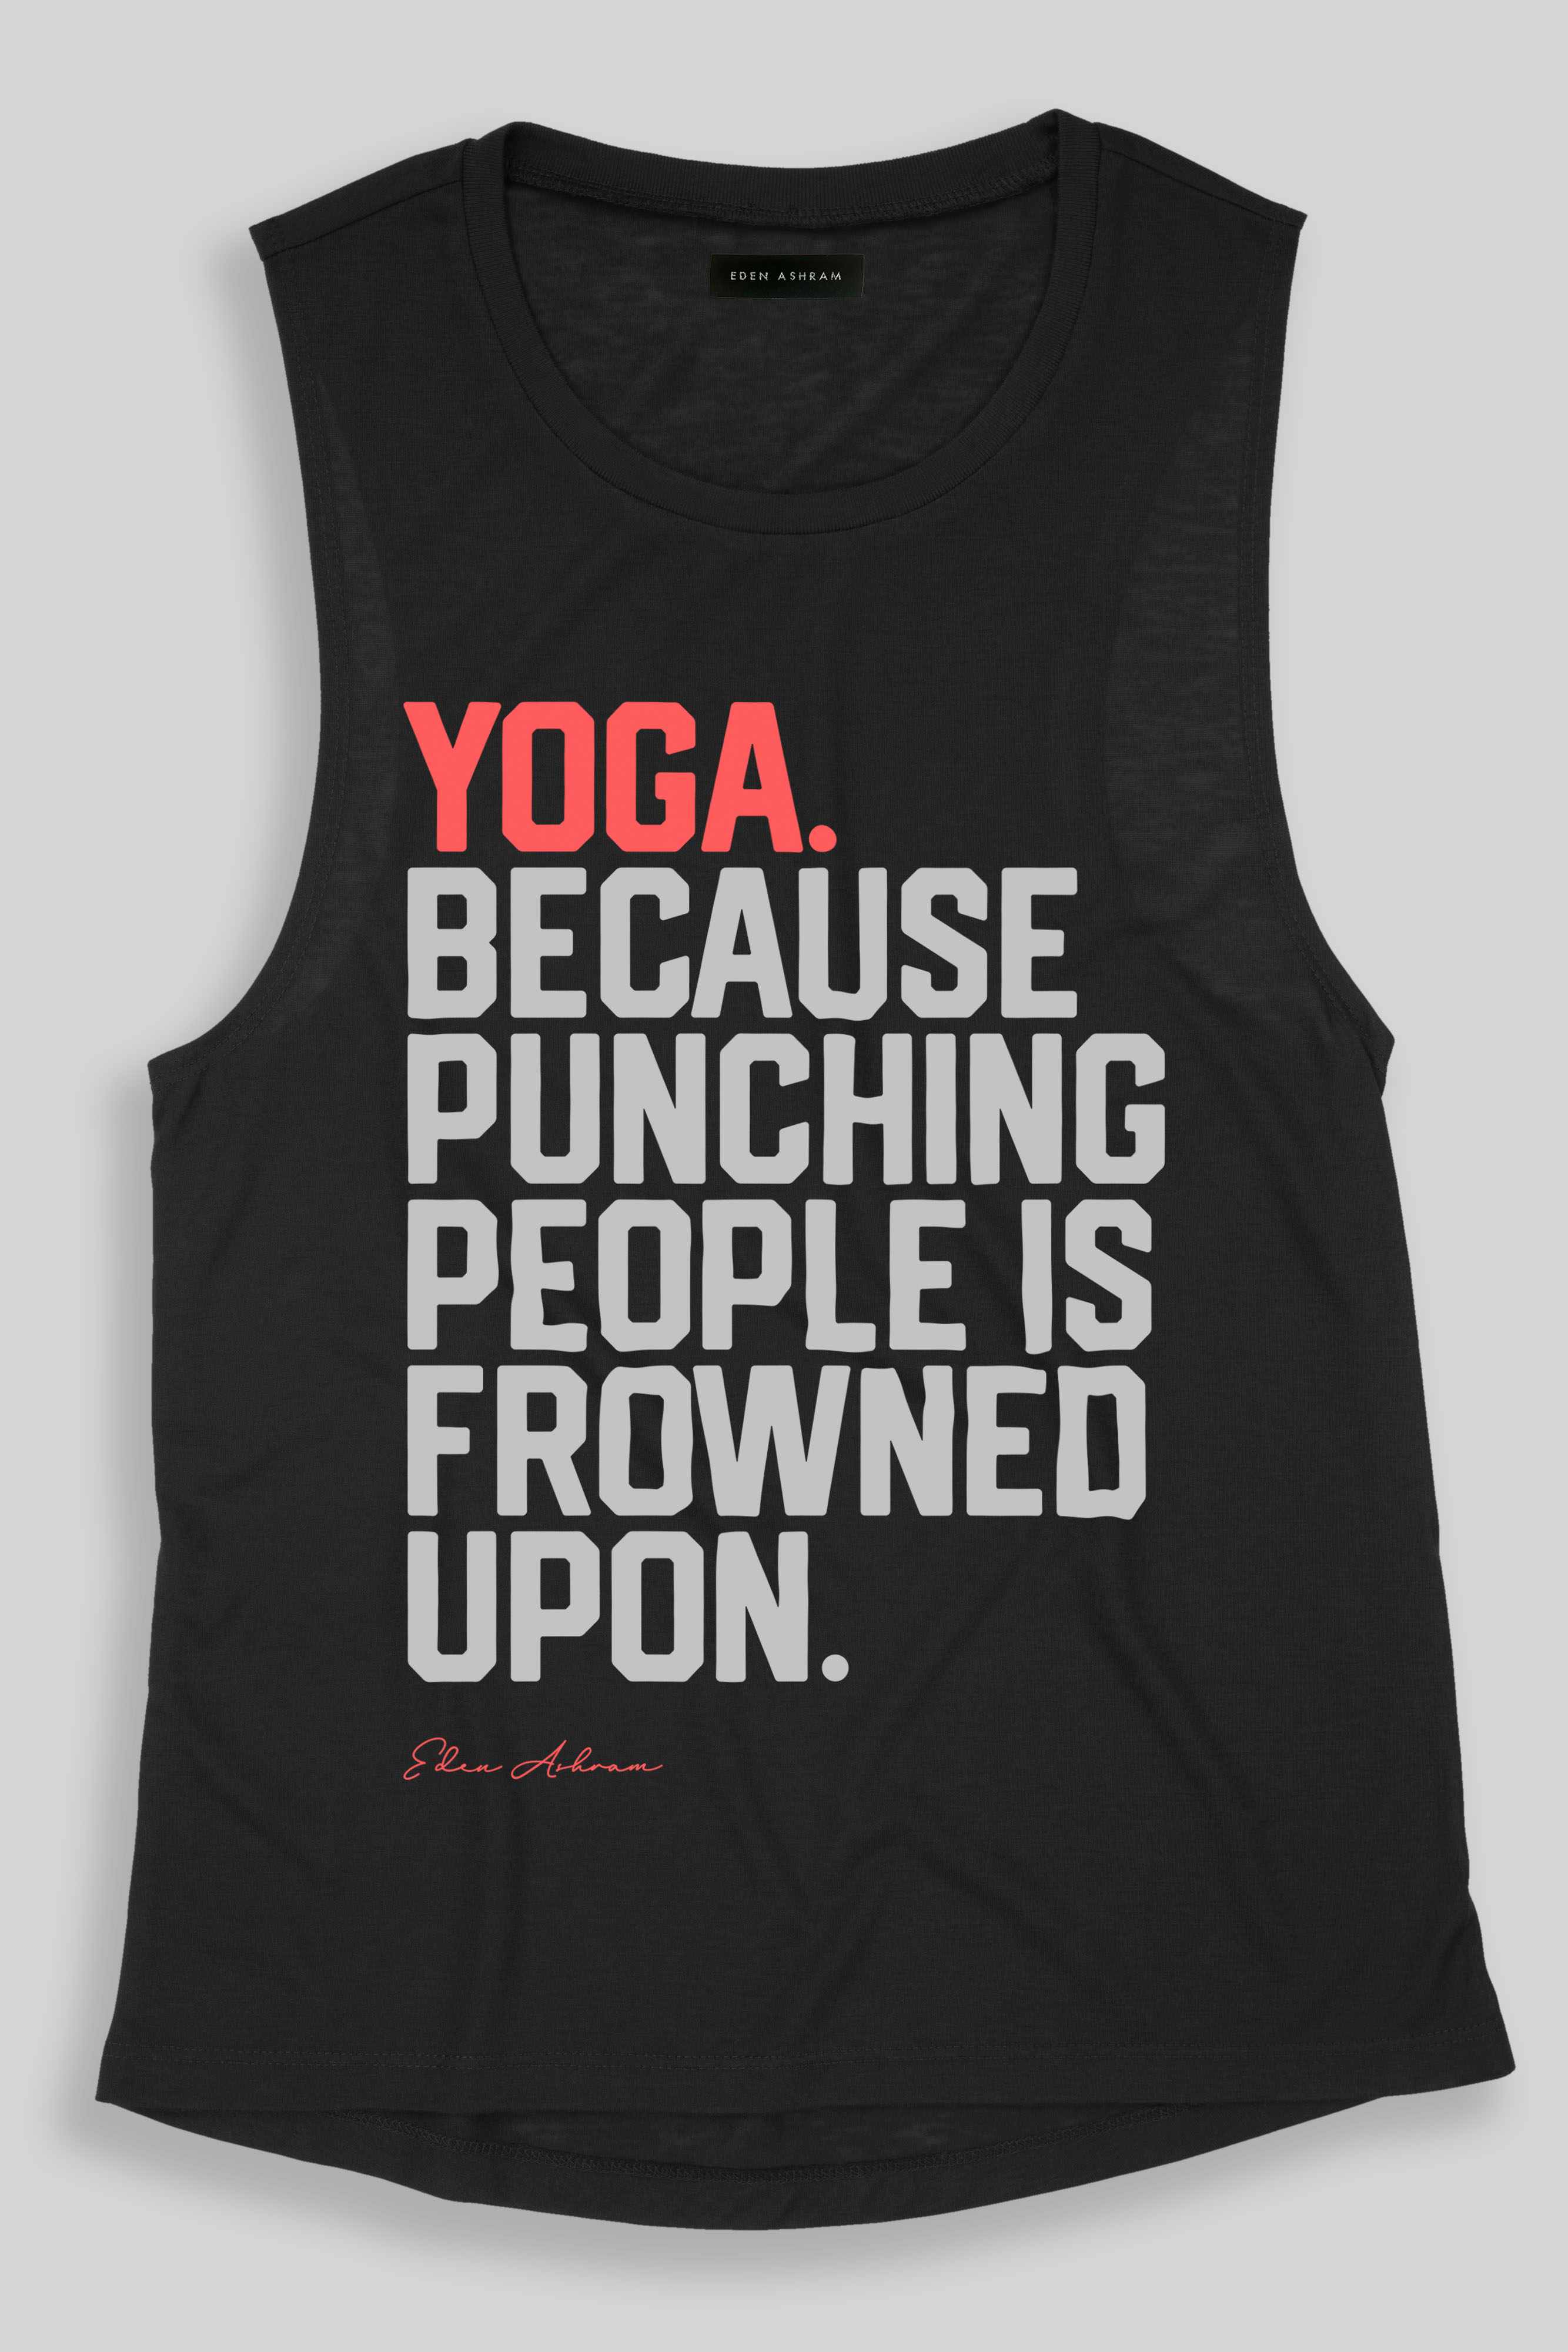 EDEN ASHRAM Yoga Because Punching People is Frowned Upon Super Soft Muscle Tank Black